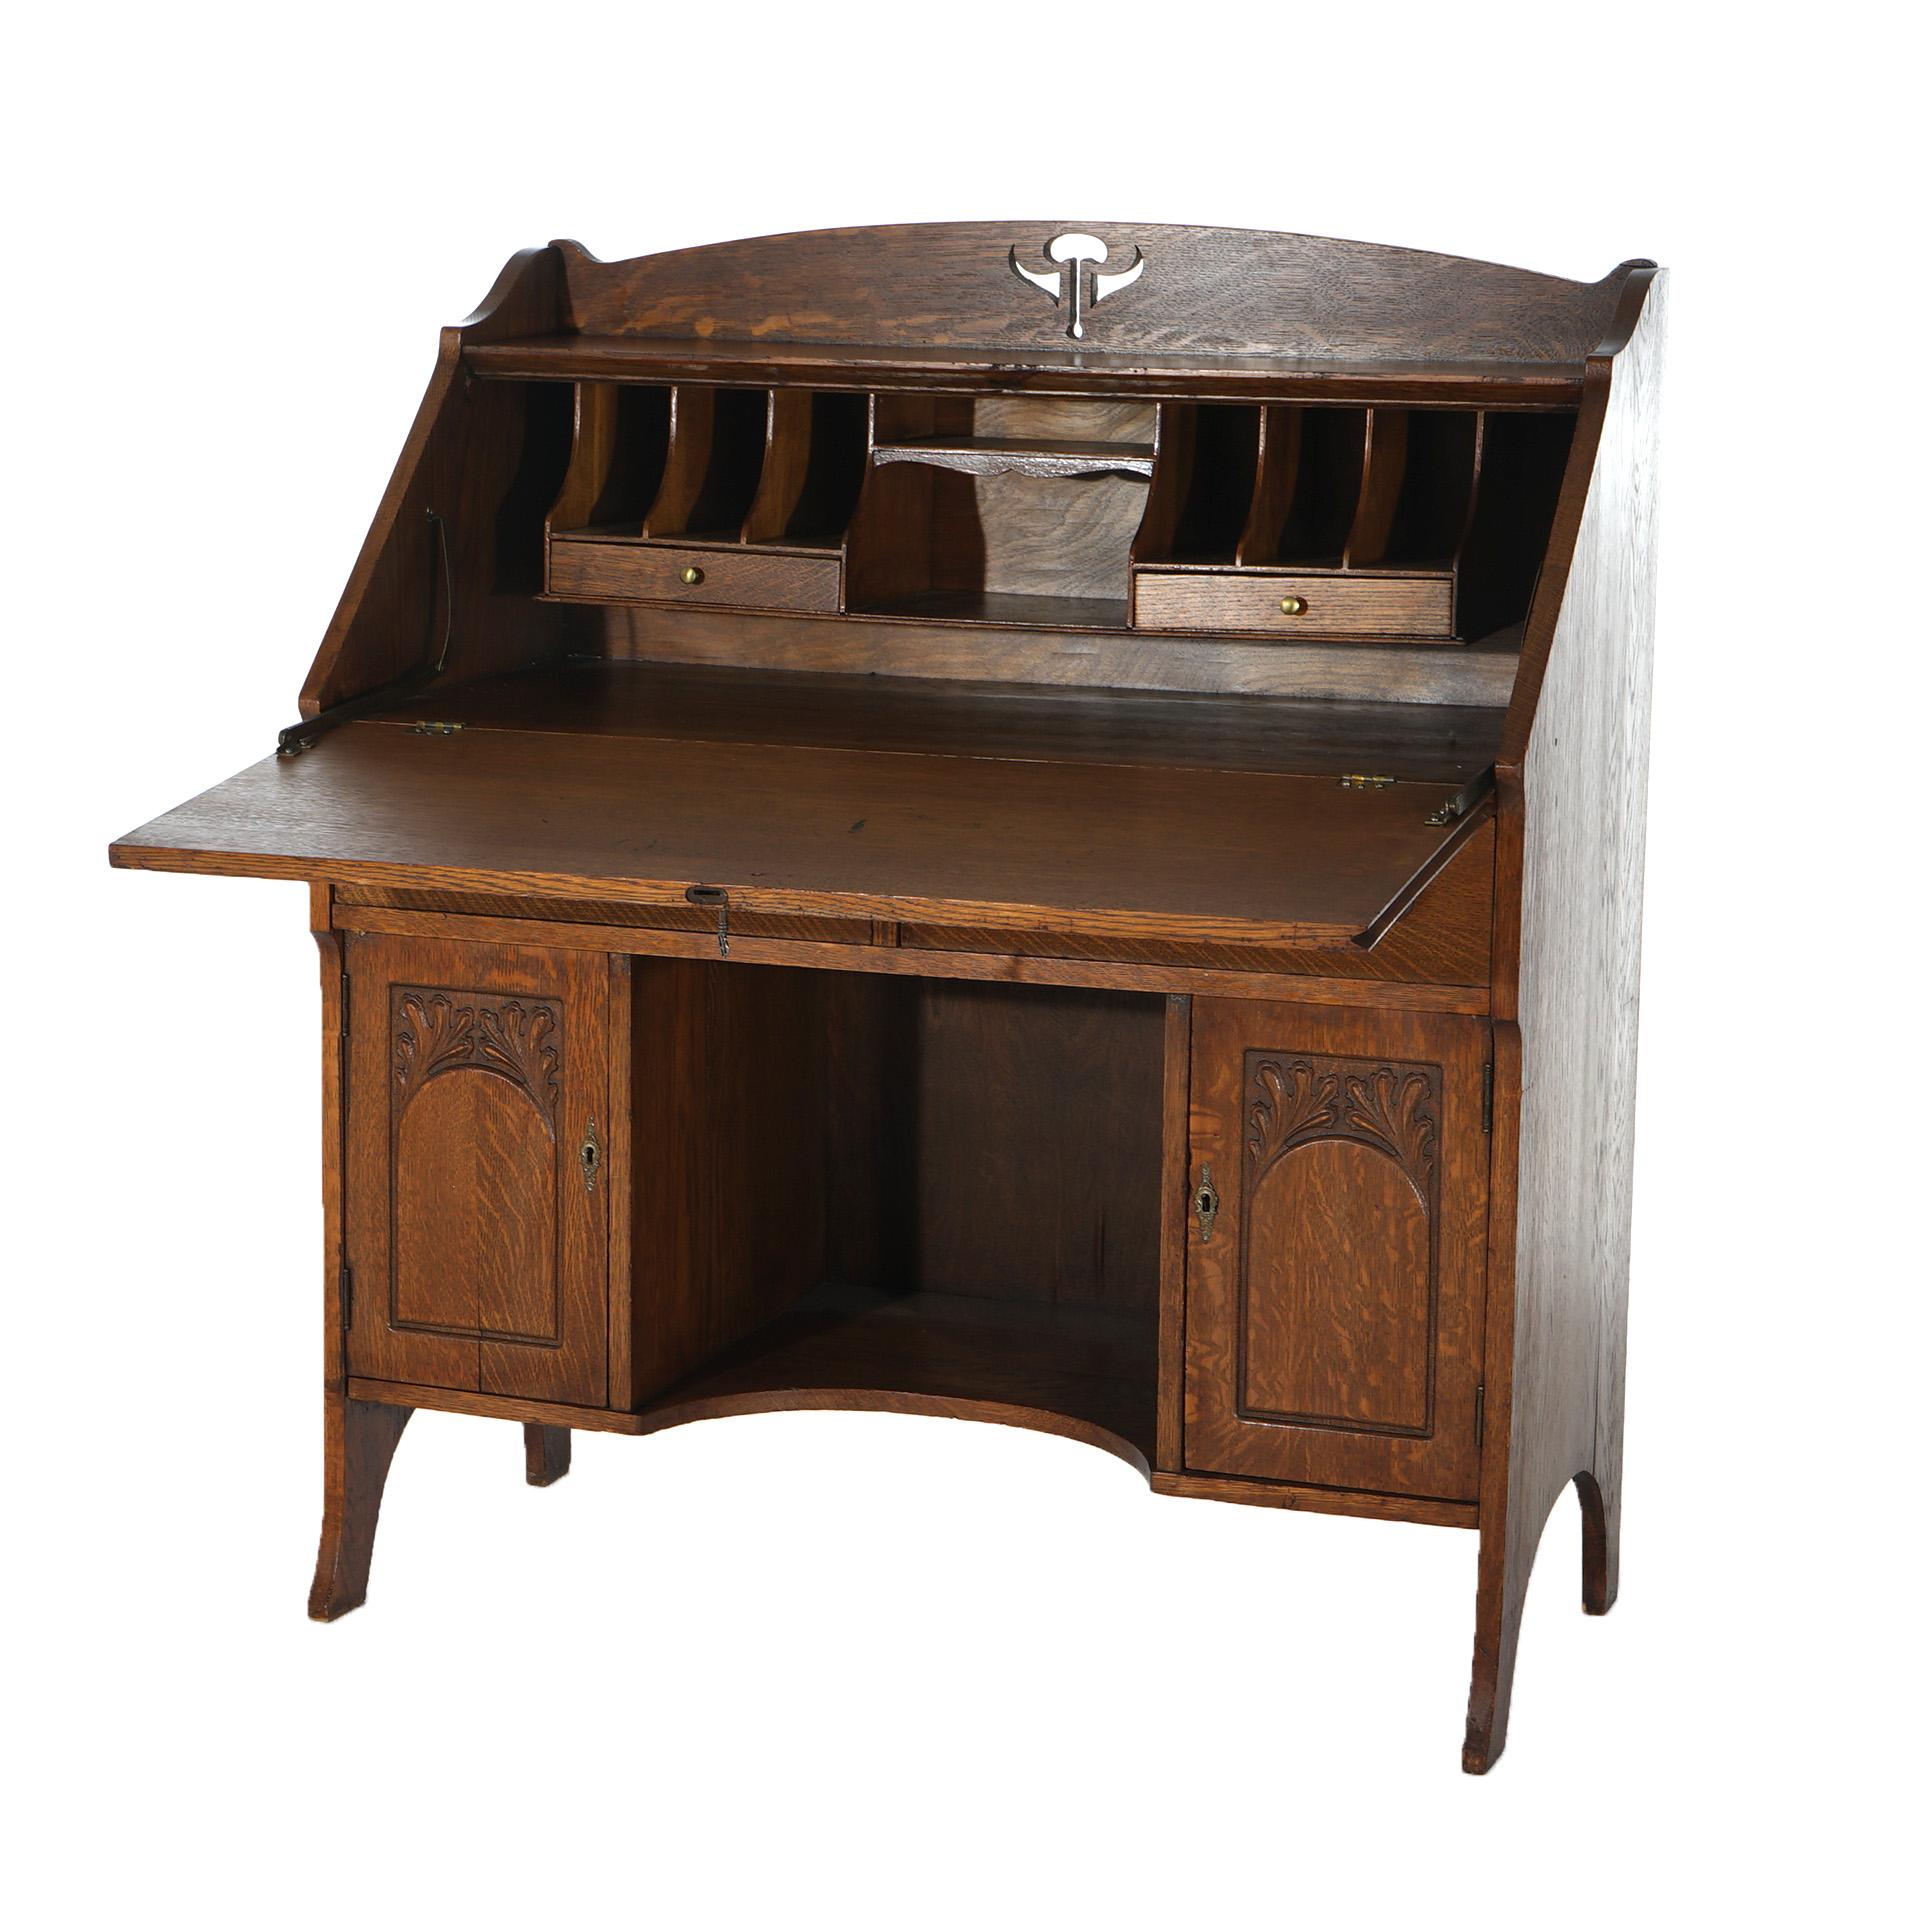 An antique Arts & Crafts drop front desk in the manner of Stickley offers oak construction with cutout backsplash and foliate carved cabinet doors, c1920

Measures- 44''H x 38.25''W x 18.75''D